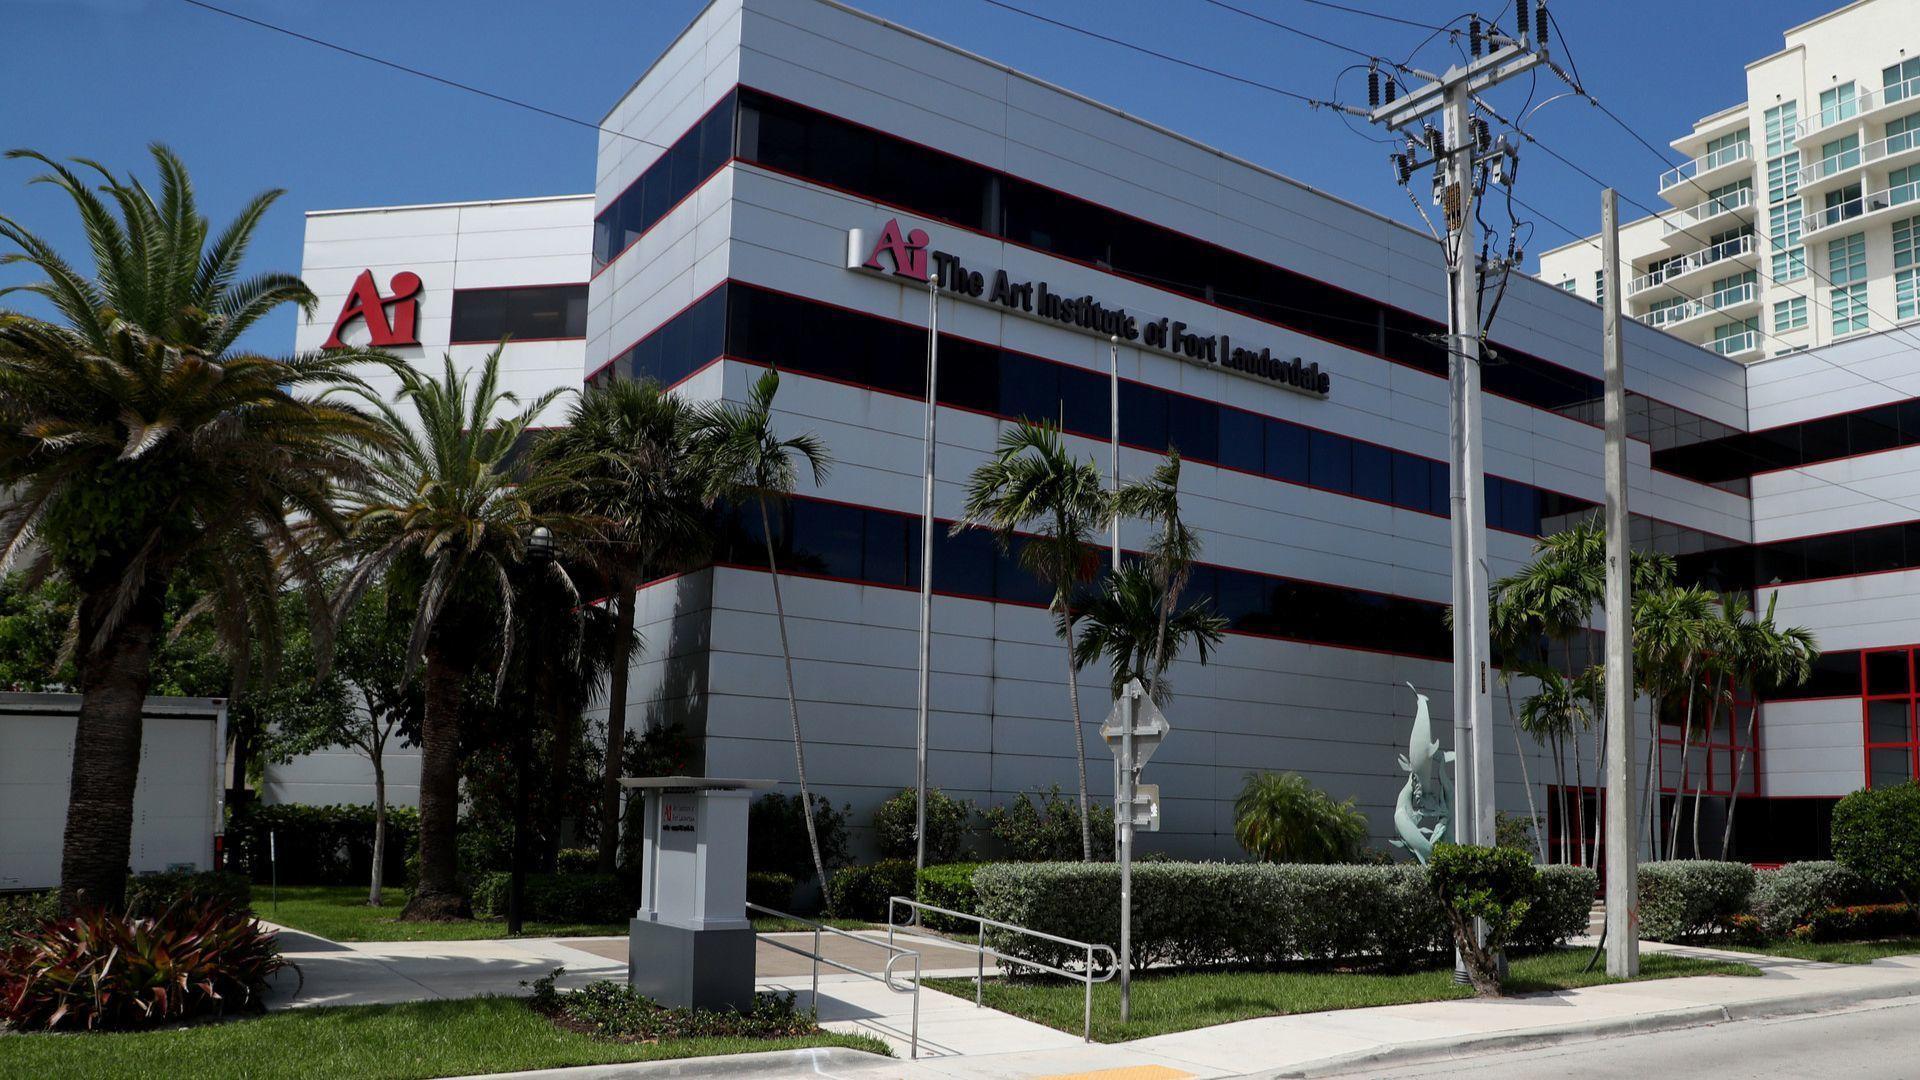 Whatever happened to the Art Institute of Fort Lauderdale? You asked